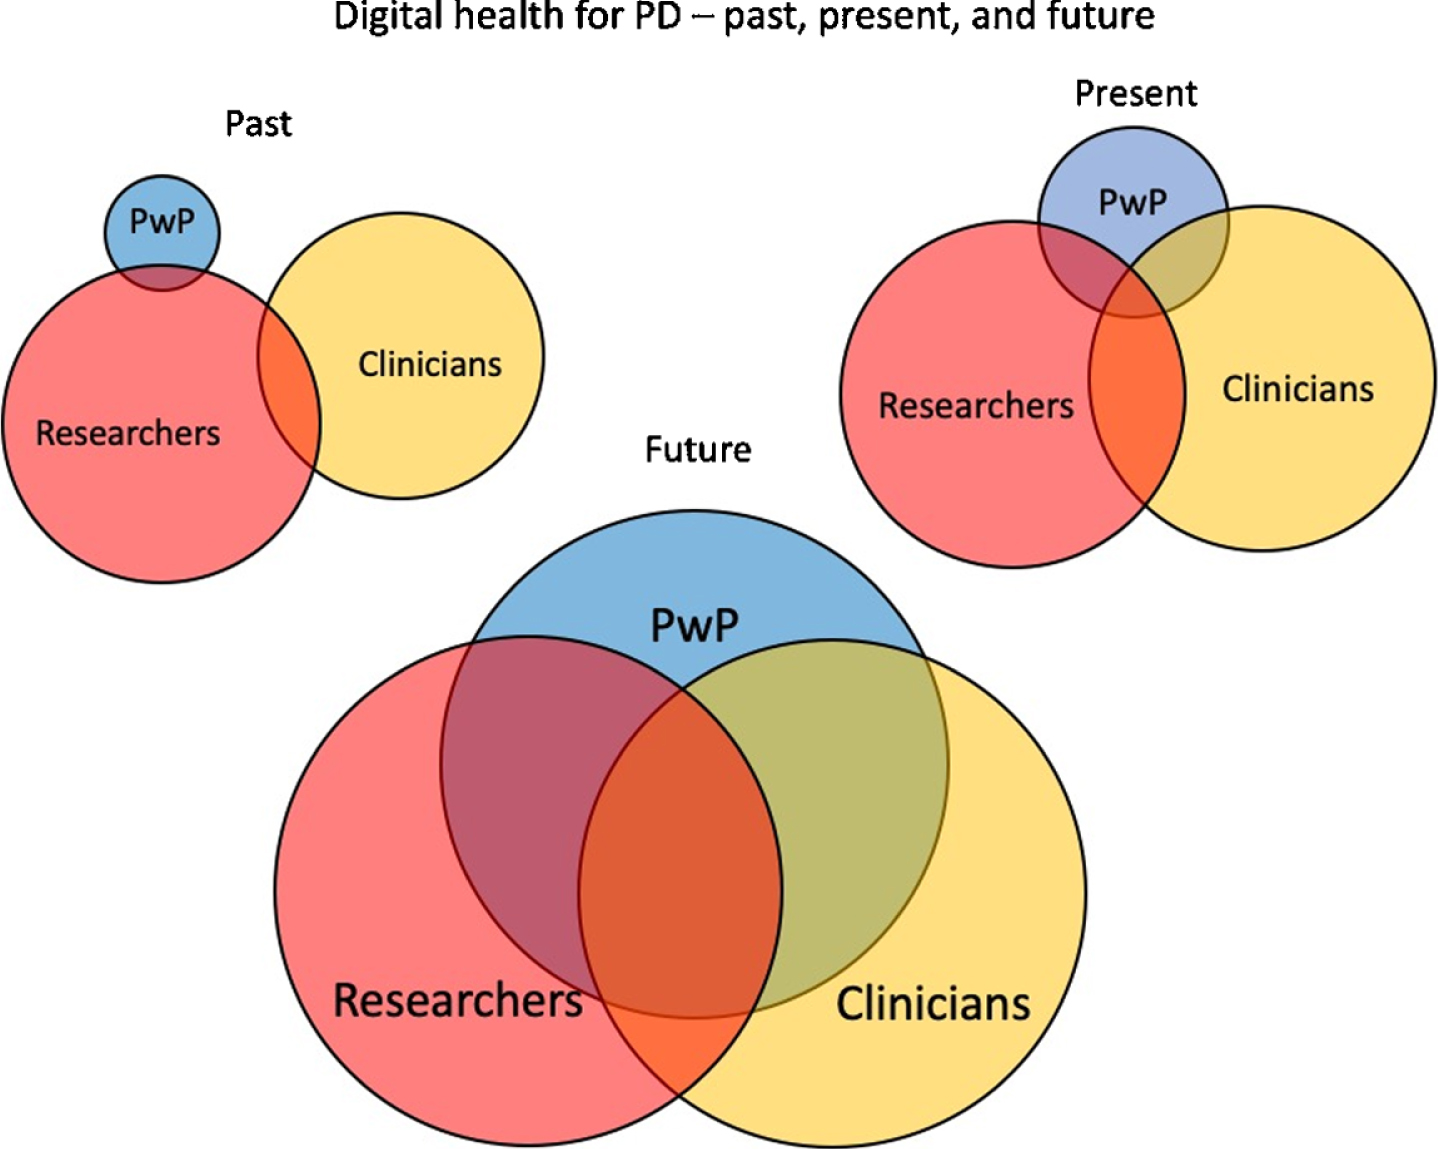 The past, present, and future of digital health for PD.